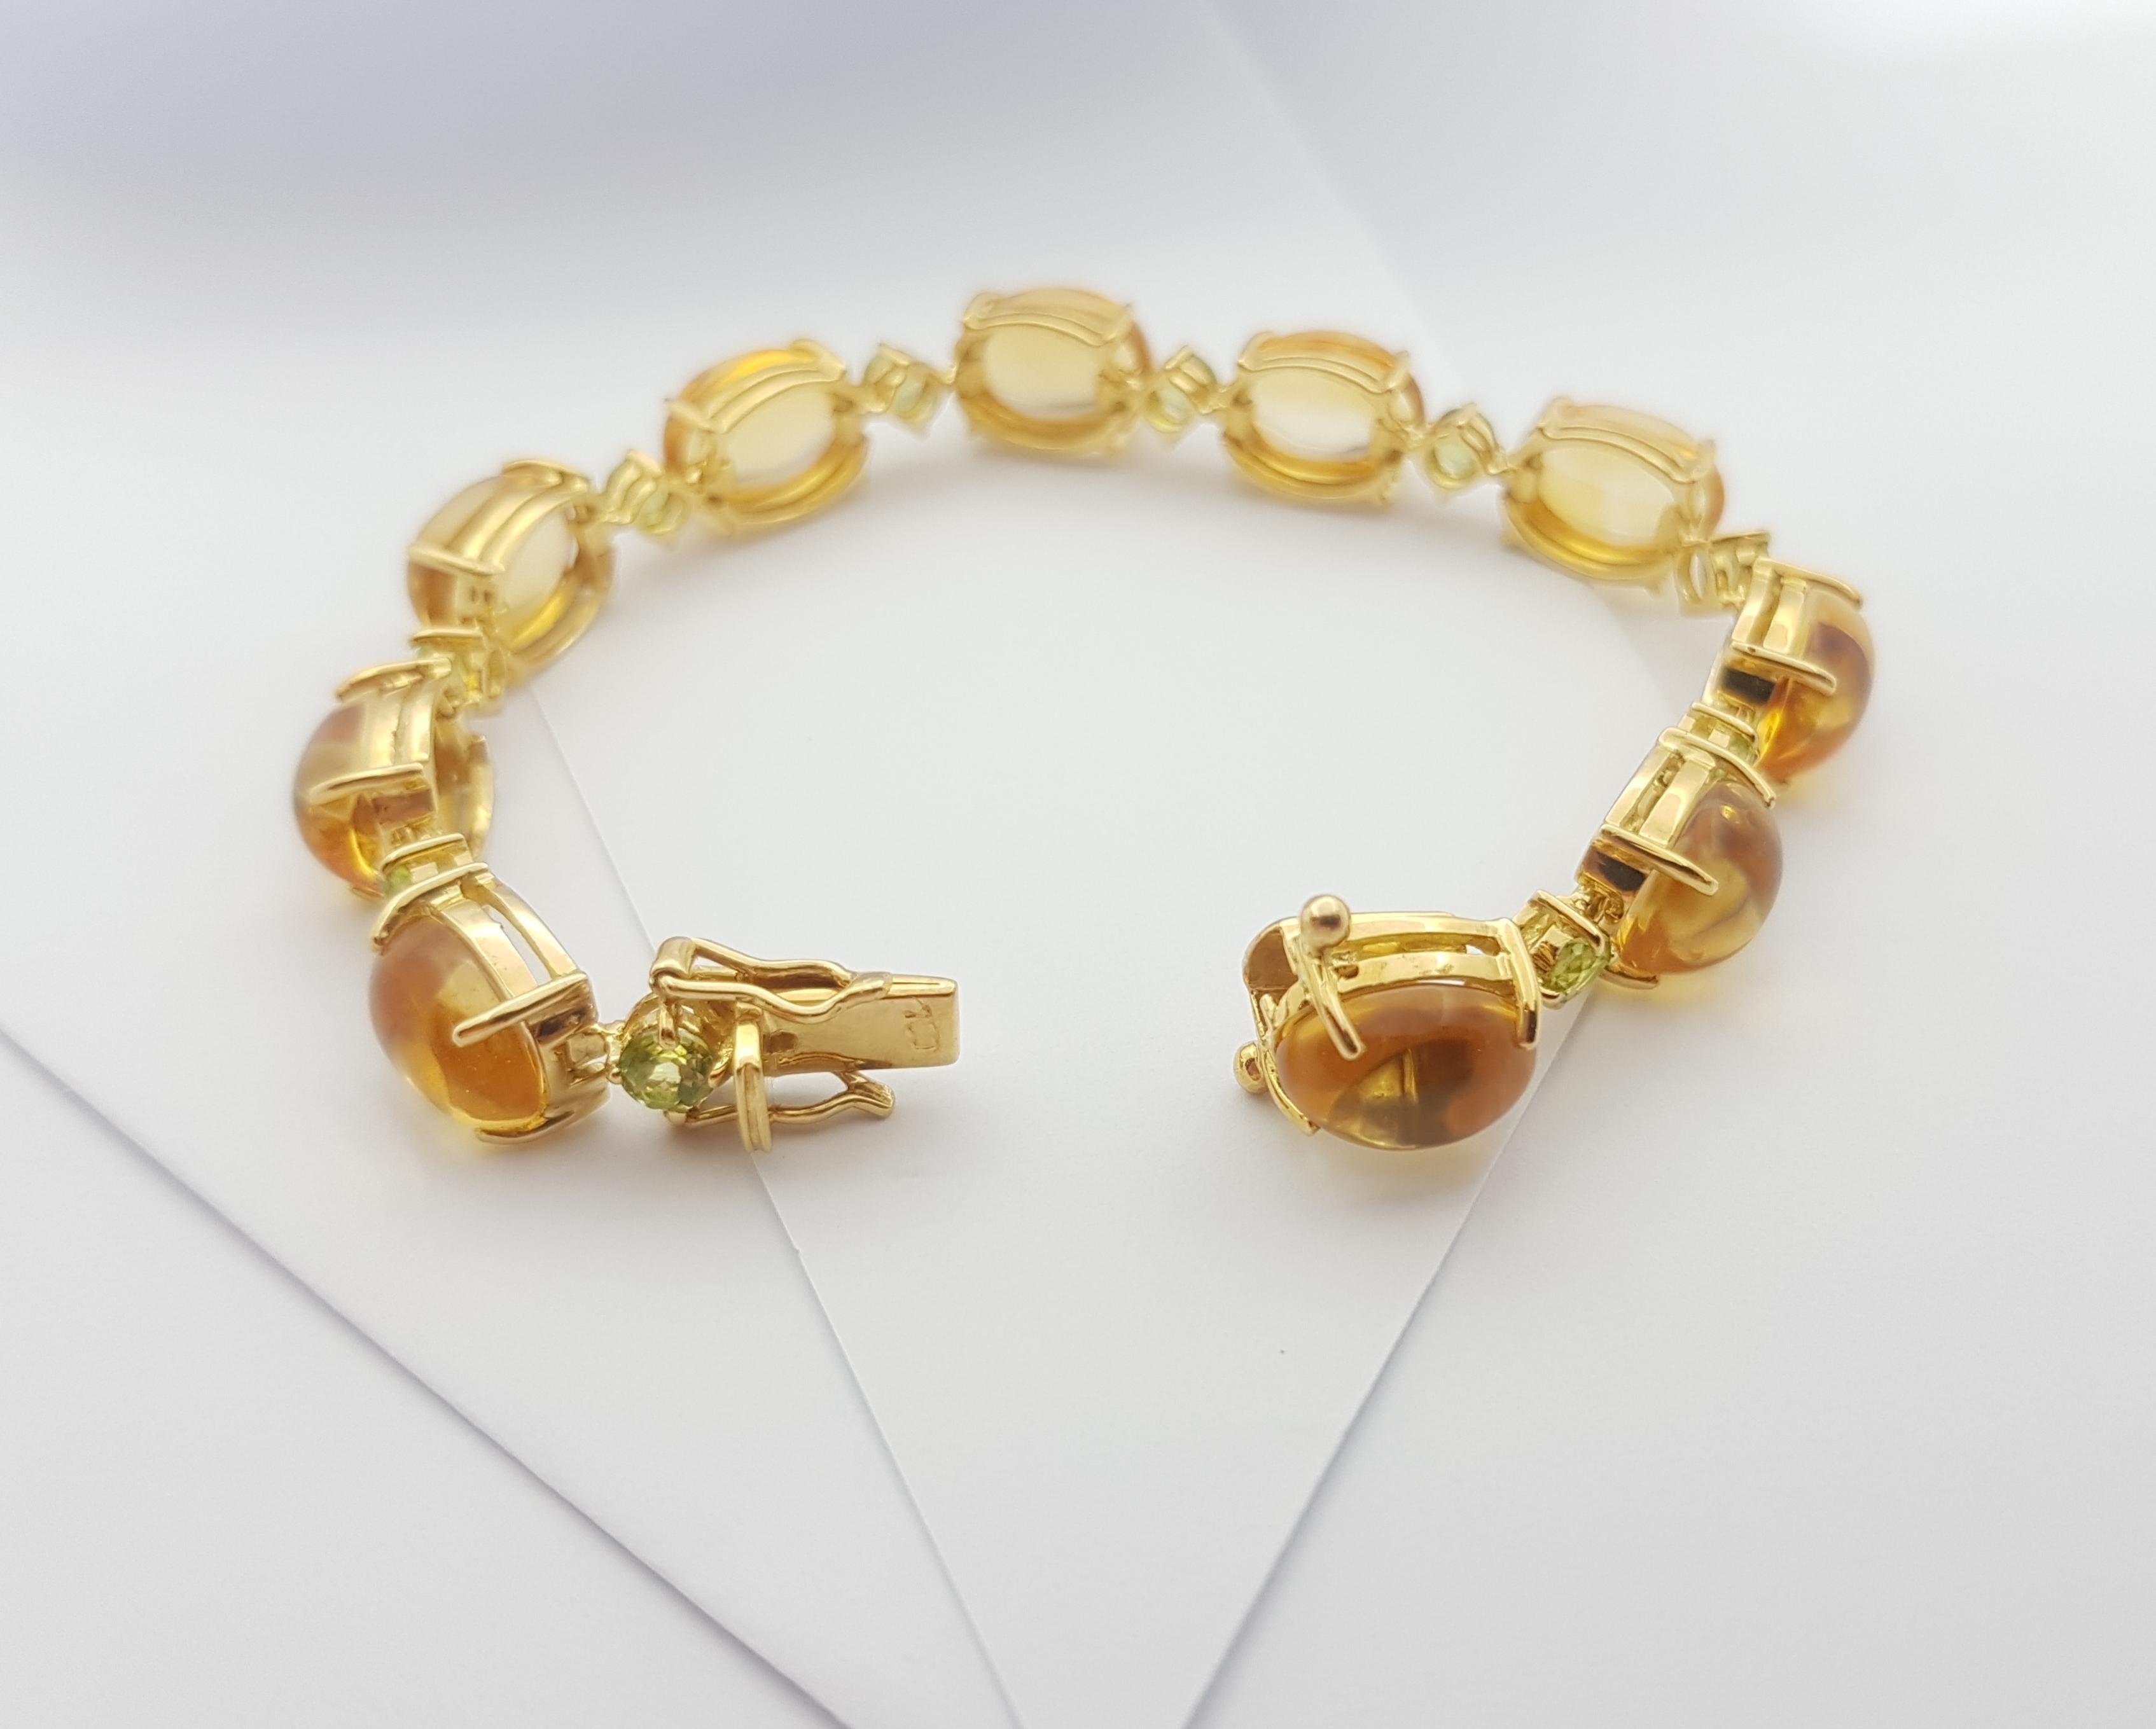 Cabochon Citrine with Peridot Bracelet set in 18 Karat Gold Settings For Sale 3